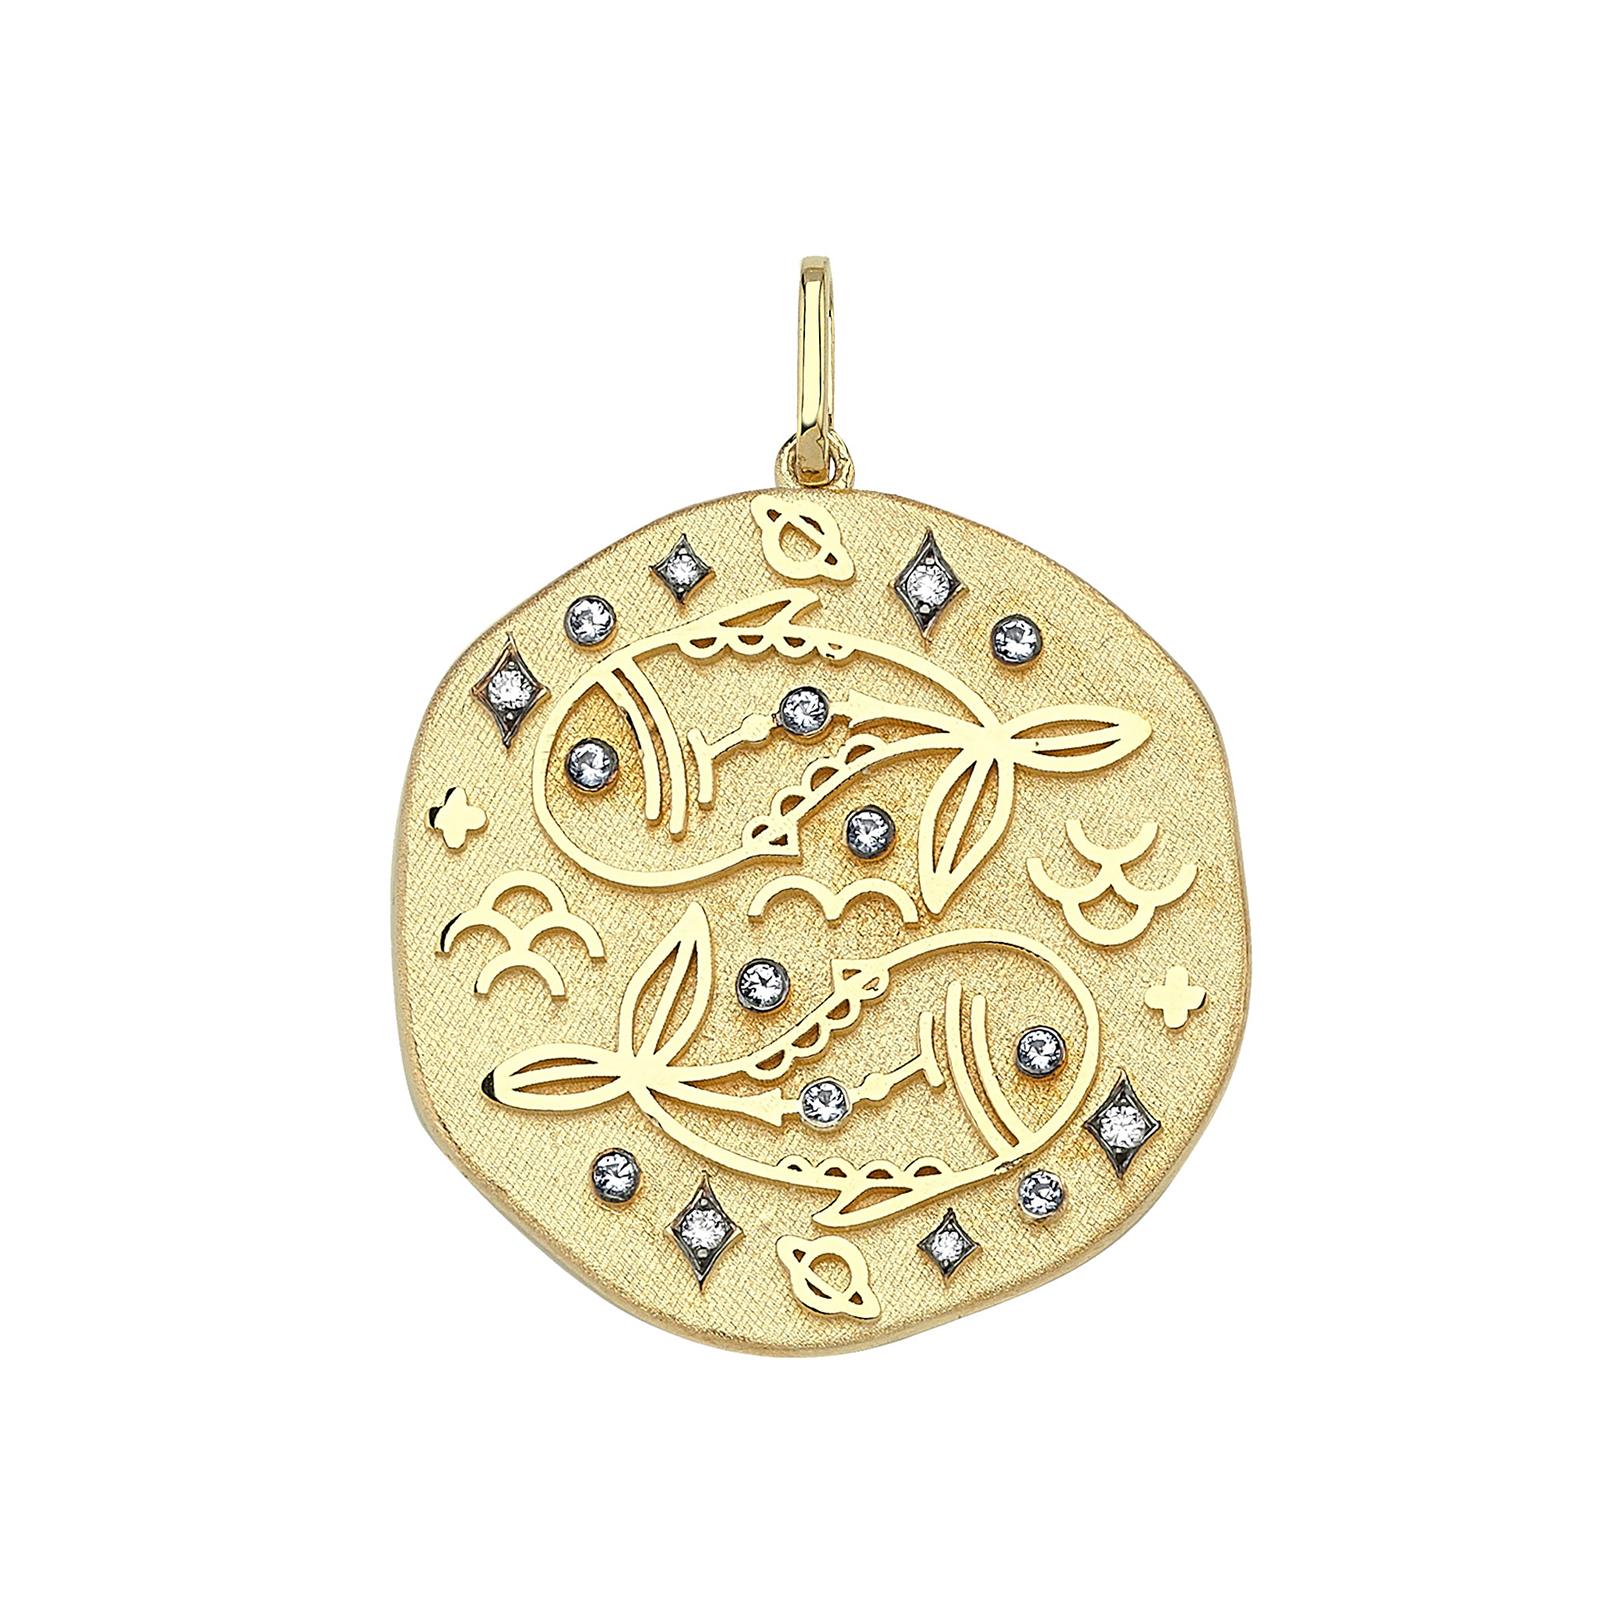 14 Karat Yellow Gold Necklaces Strung With Handcrafted Medallions Illustrating Twelve Horoscope Signs.
The Customized Symbol With Brilliant-Cut Diamonds And An Auspicious Birthstone Believed To Protect And Bring Luck To Its Wearer. Allow This